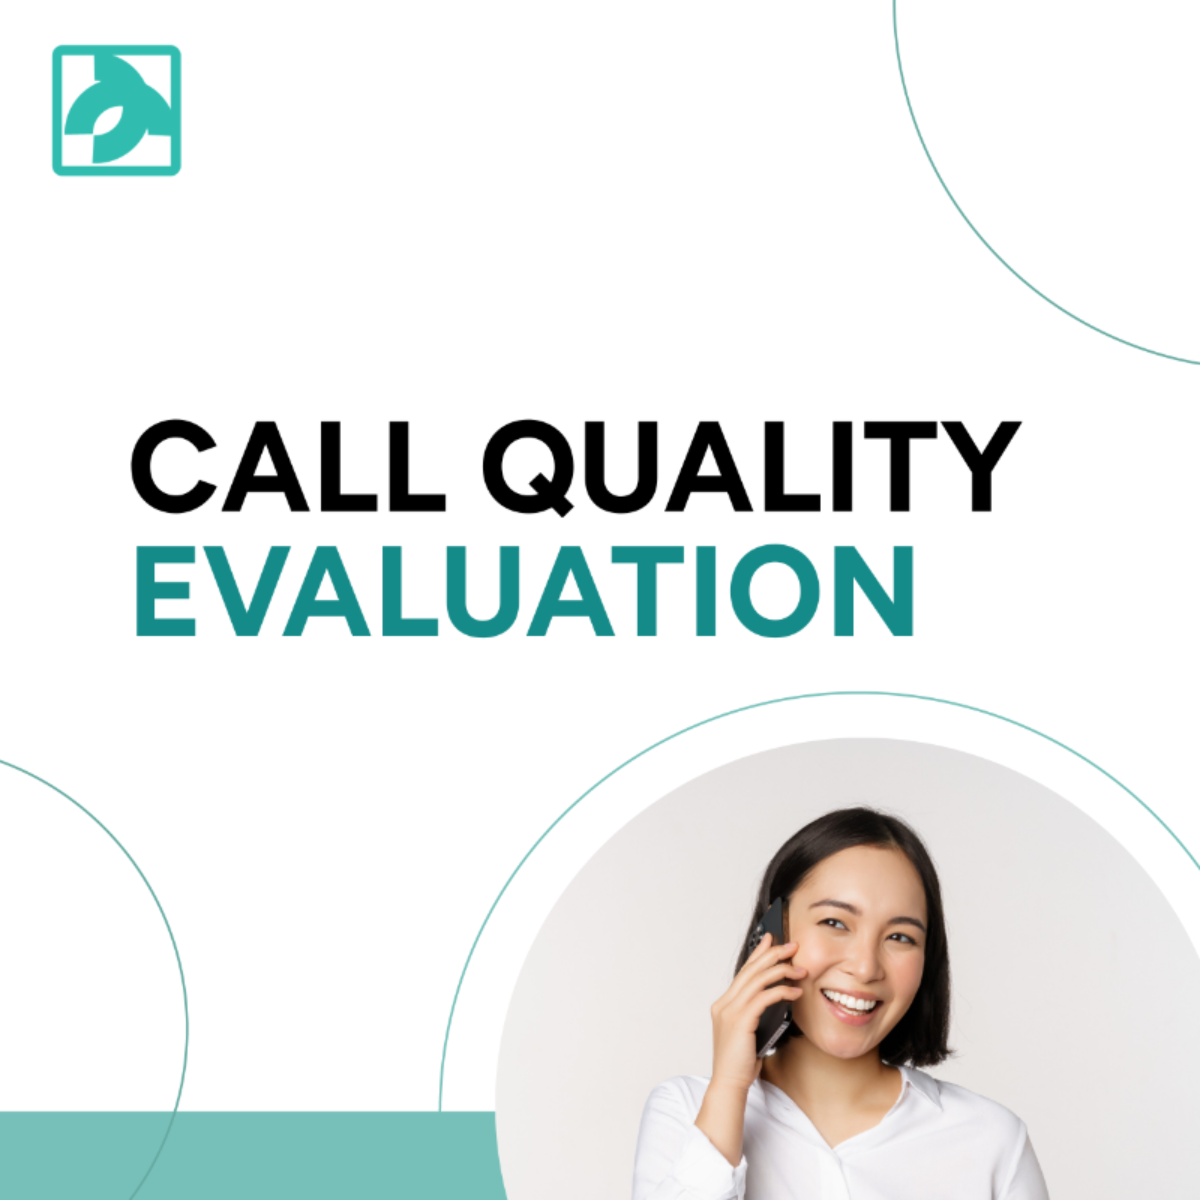 Call Quality Evaluation Template